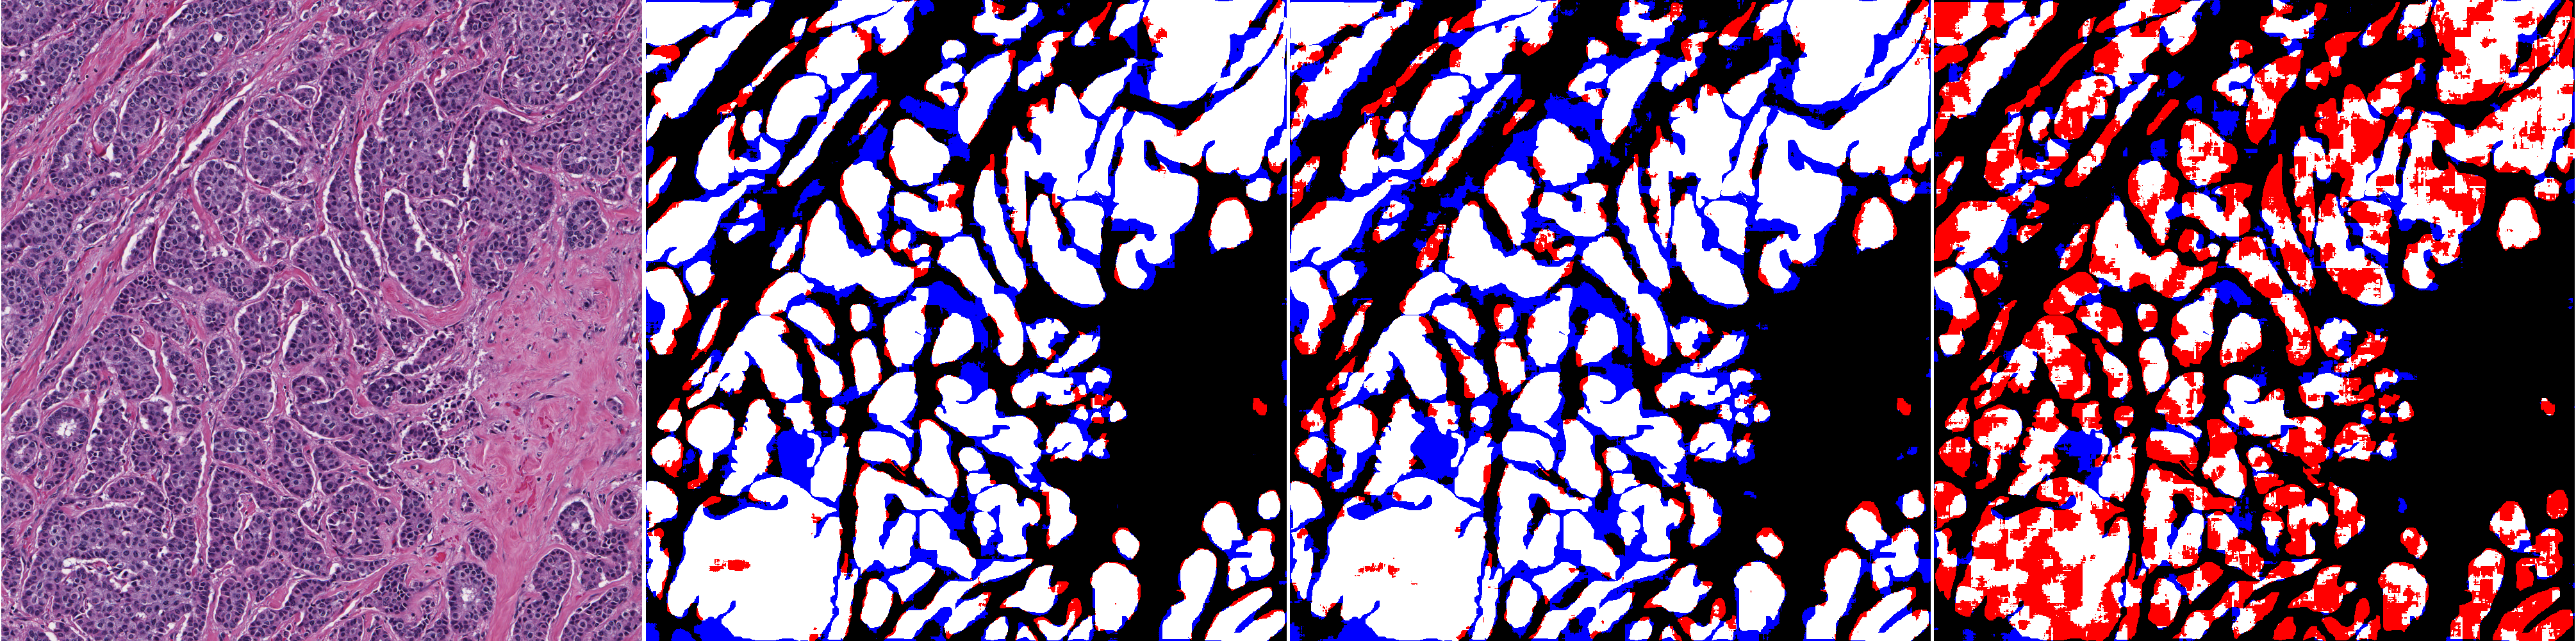 Results on a test slide for the baseline ShortRes network trained with different datasets. From left to right: test image and the results obtained when using original, HD and noisy training sets. False positive pixels are shown in blue, false negatives in red and correctly segmented areas in white.